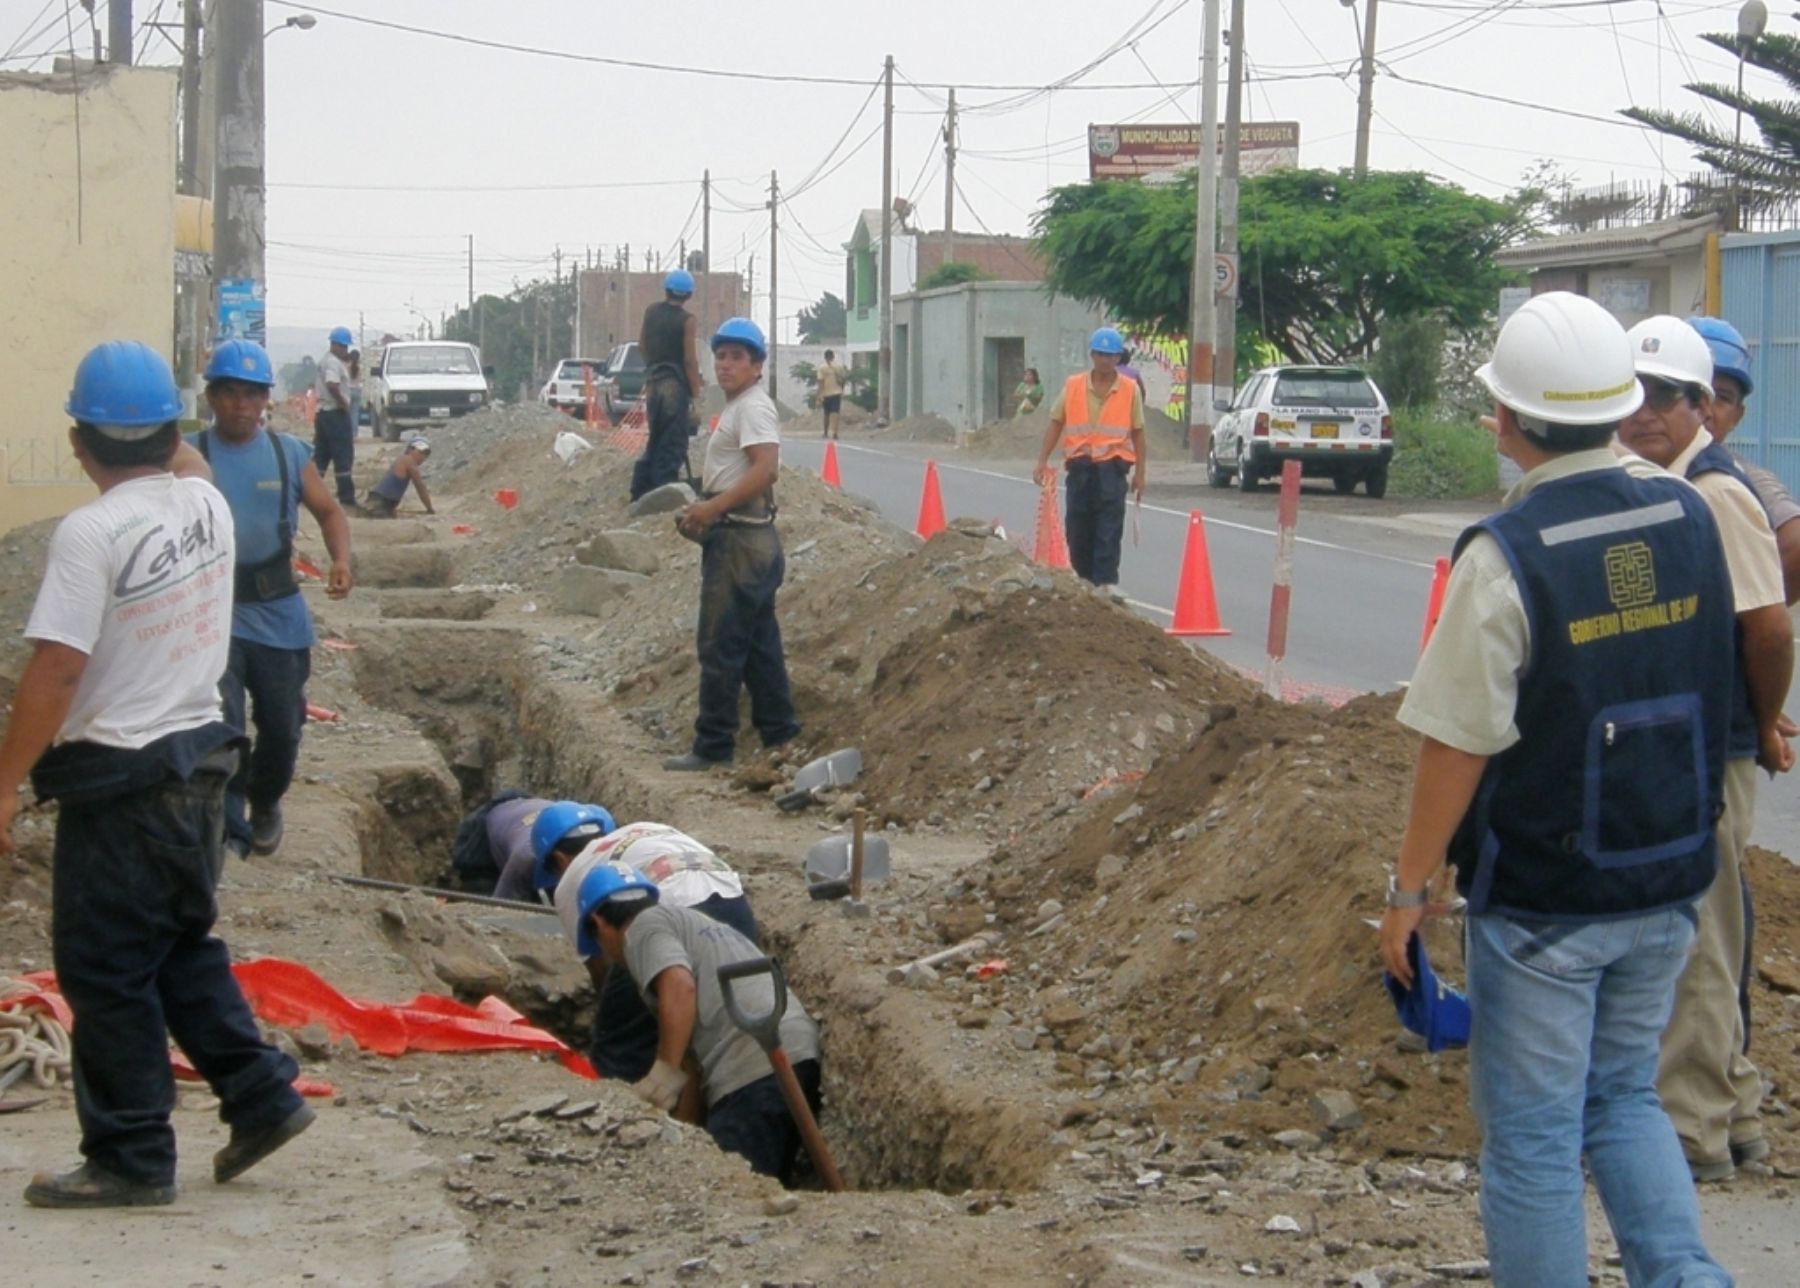 Sanitation works in the province of Huaura (Lima). Photo: ANDINA.